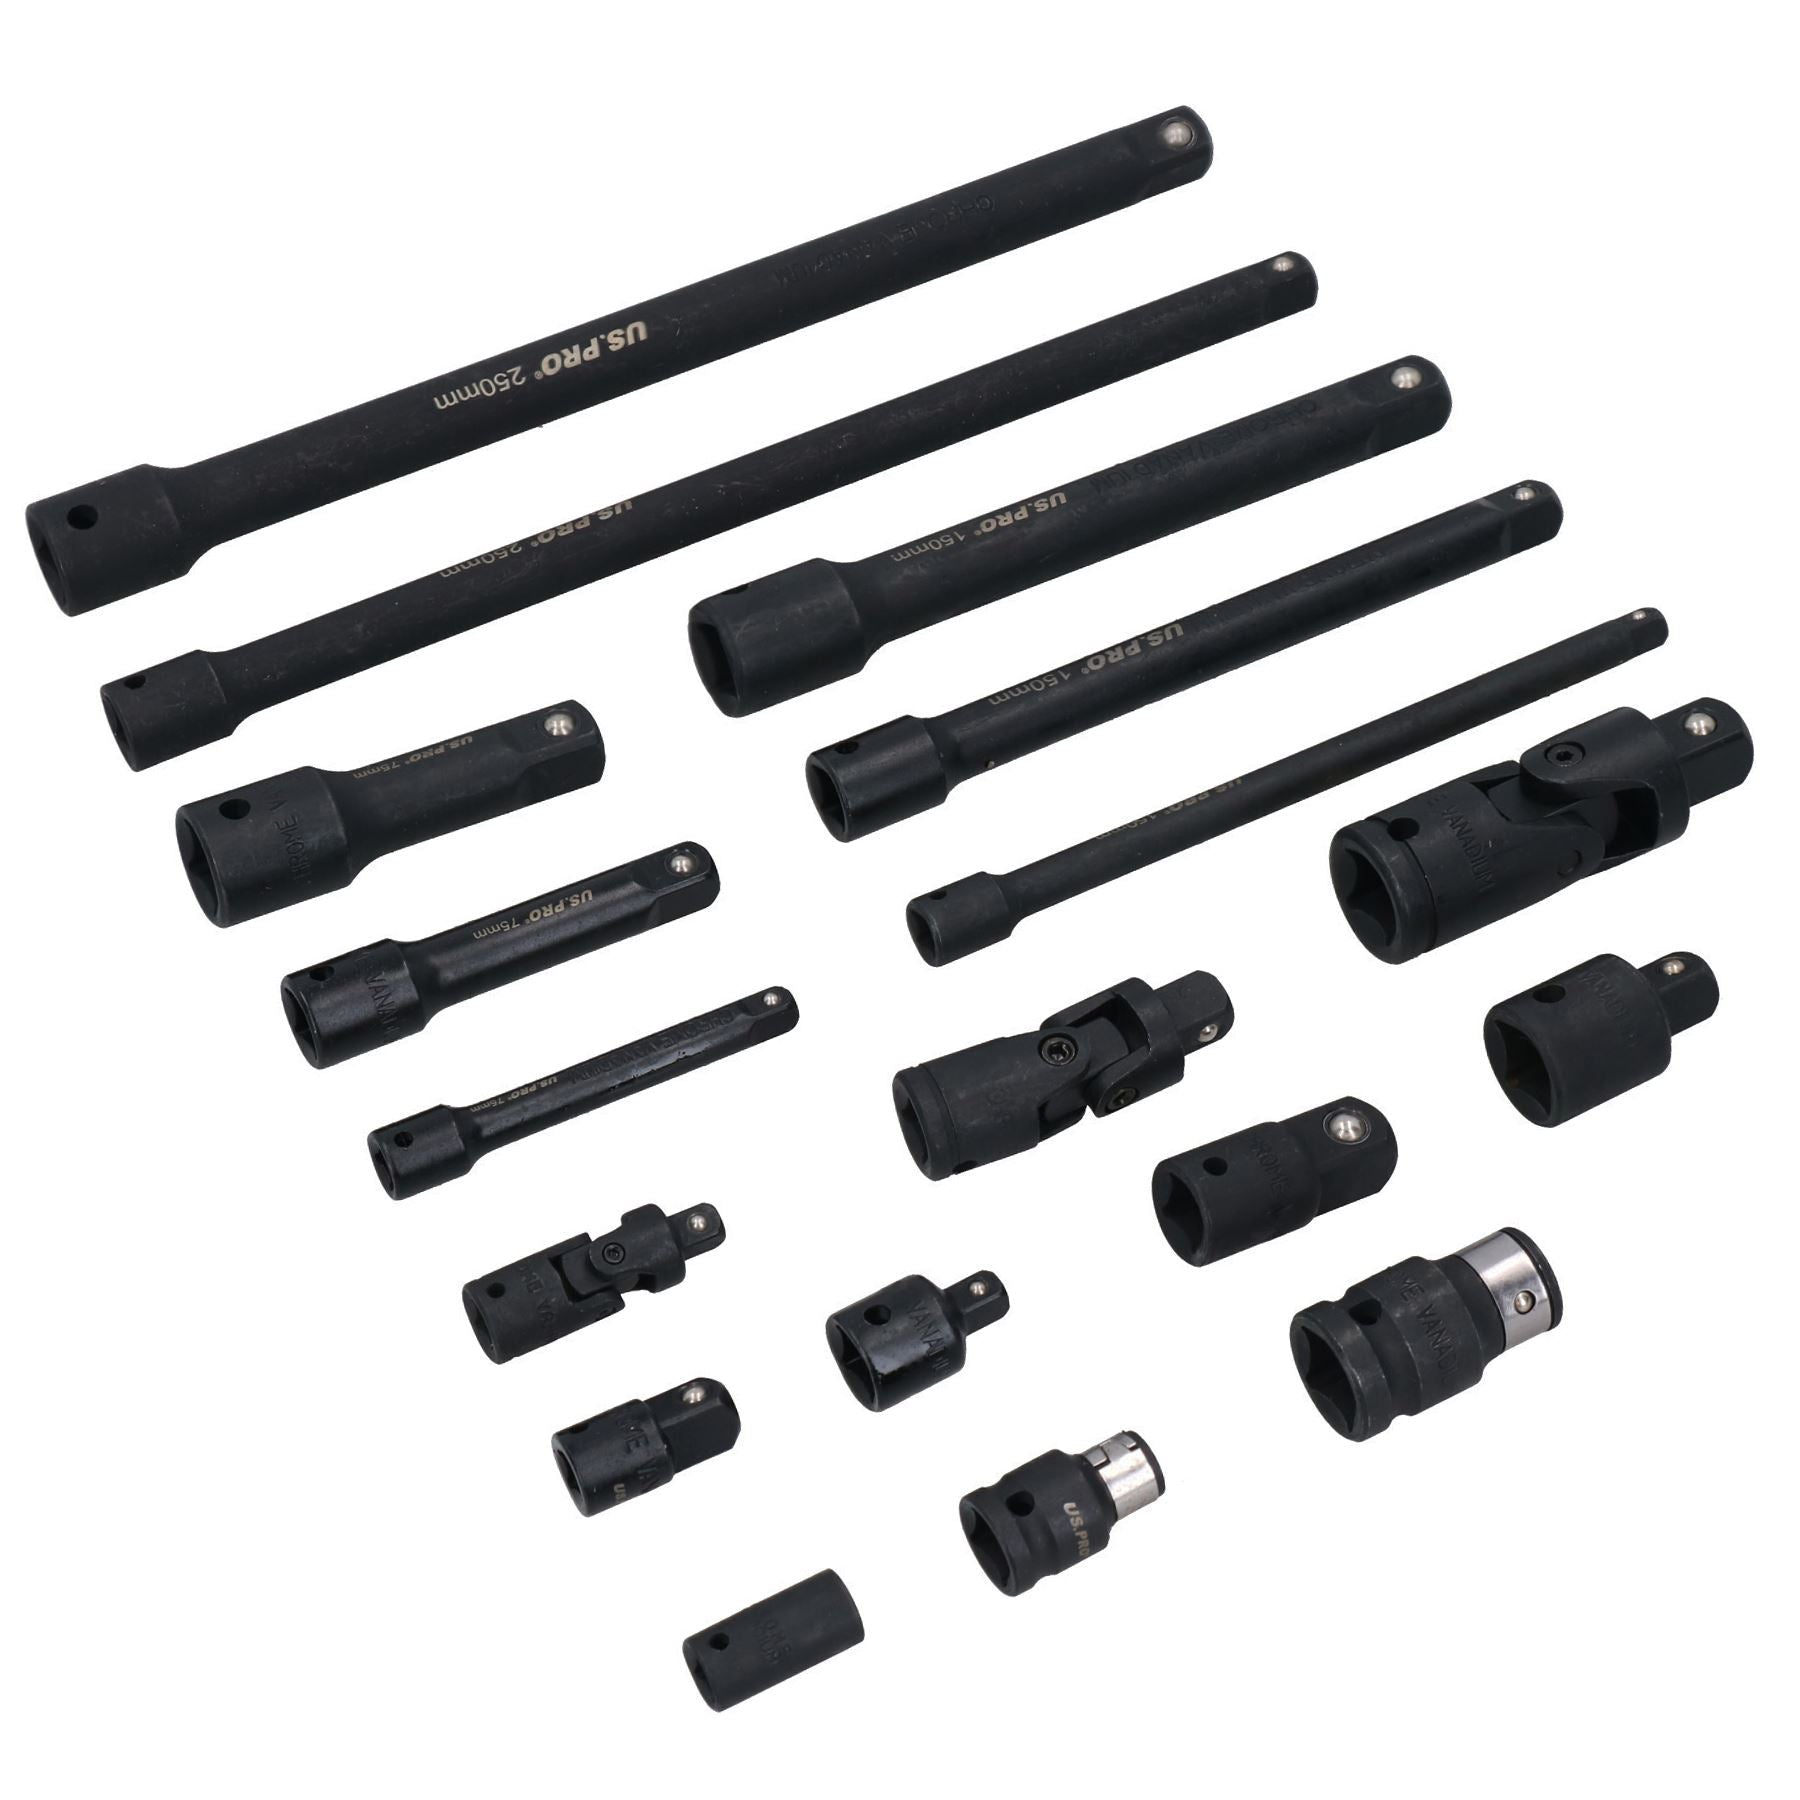 18pc Impact Socket Adaptor And Accessory Kit Extensions UJ’s Bits Mixed Drive